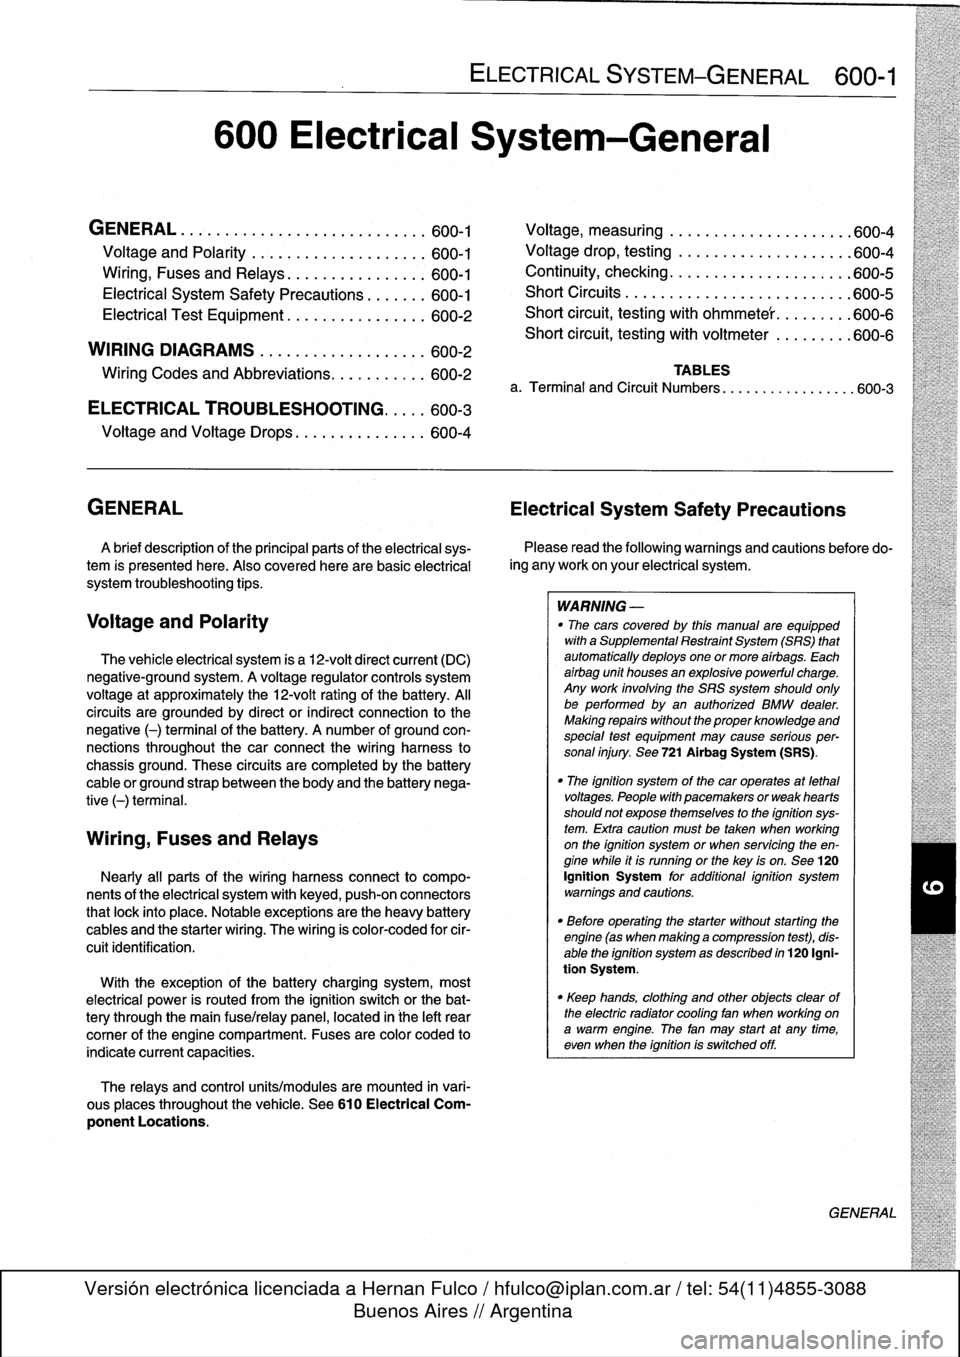 BMW 328i 1997 E36 Workshop Manual 
600
Electrical
System-General

GENERAL
.
...........
.
.
.
.
.
.
.
.
.
...
.
...
600-1

Voltage
and
Polarity
........
.
.
.
.
.
.
.
.....
600-1

Ming,
Fuses
and
Relays
............
.
.
.
.
600-1

Ele